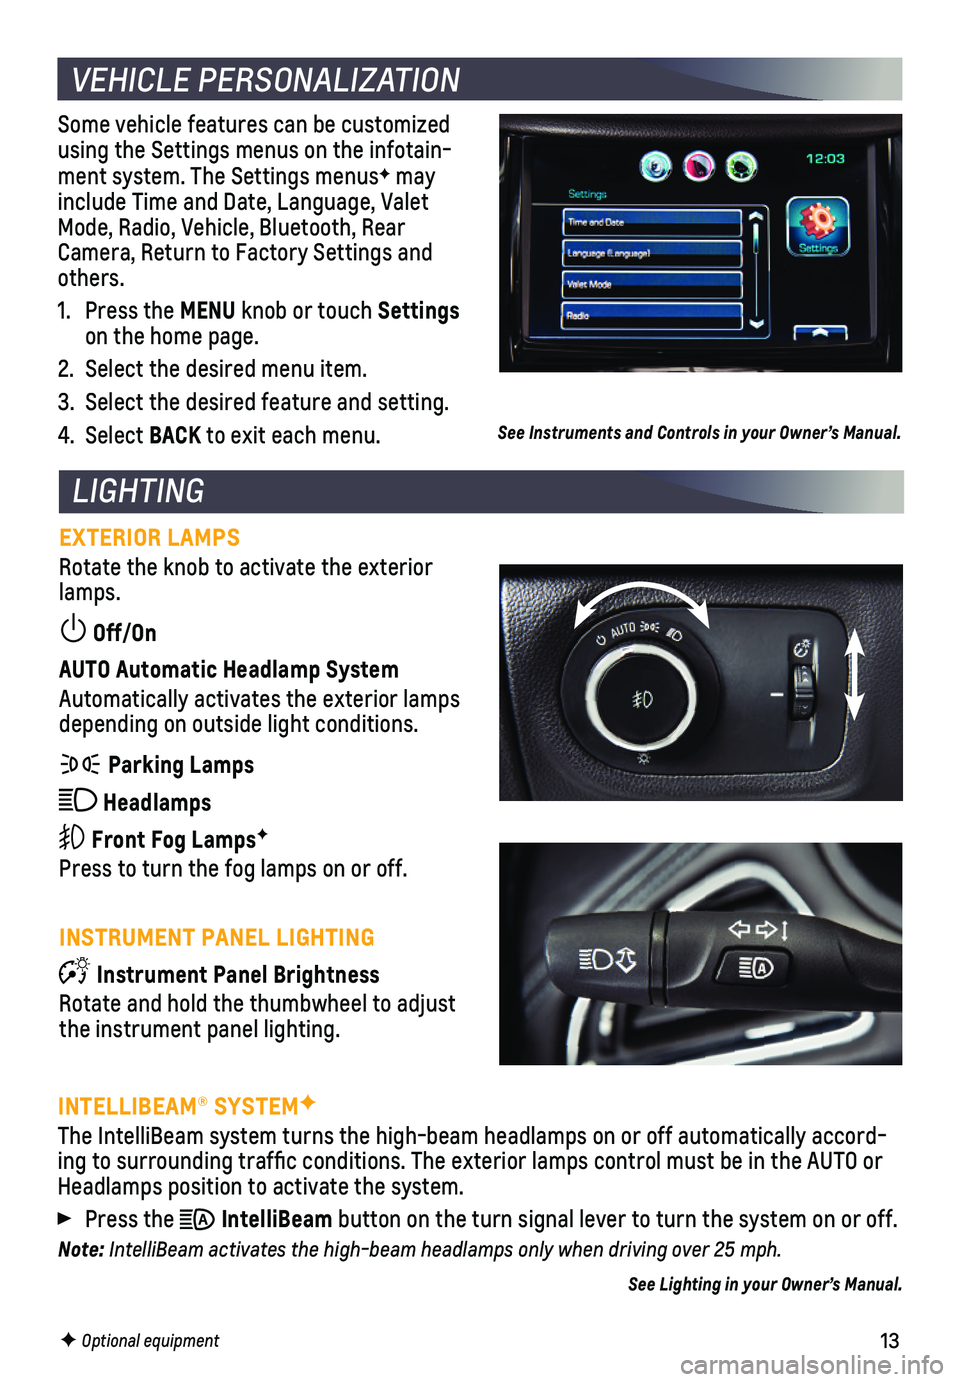 CHEVROLET CRUZE 2018  Get To Know Guide 13
Some vehicle features can be customized using the Settings menus on the infotain-ment system. The Settings menusF may include Time and Date, Language, Valet Mode, Radio, Vehicle, Bluetooth, Rear Ca